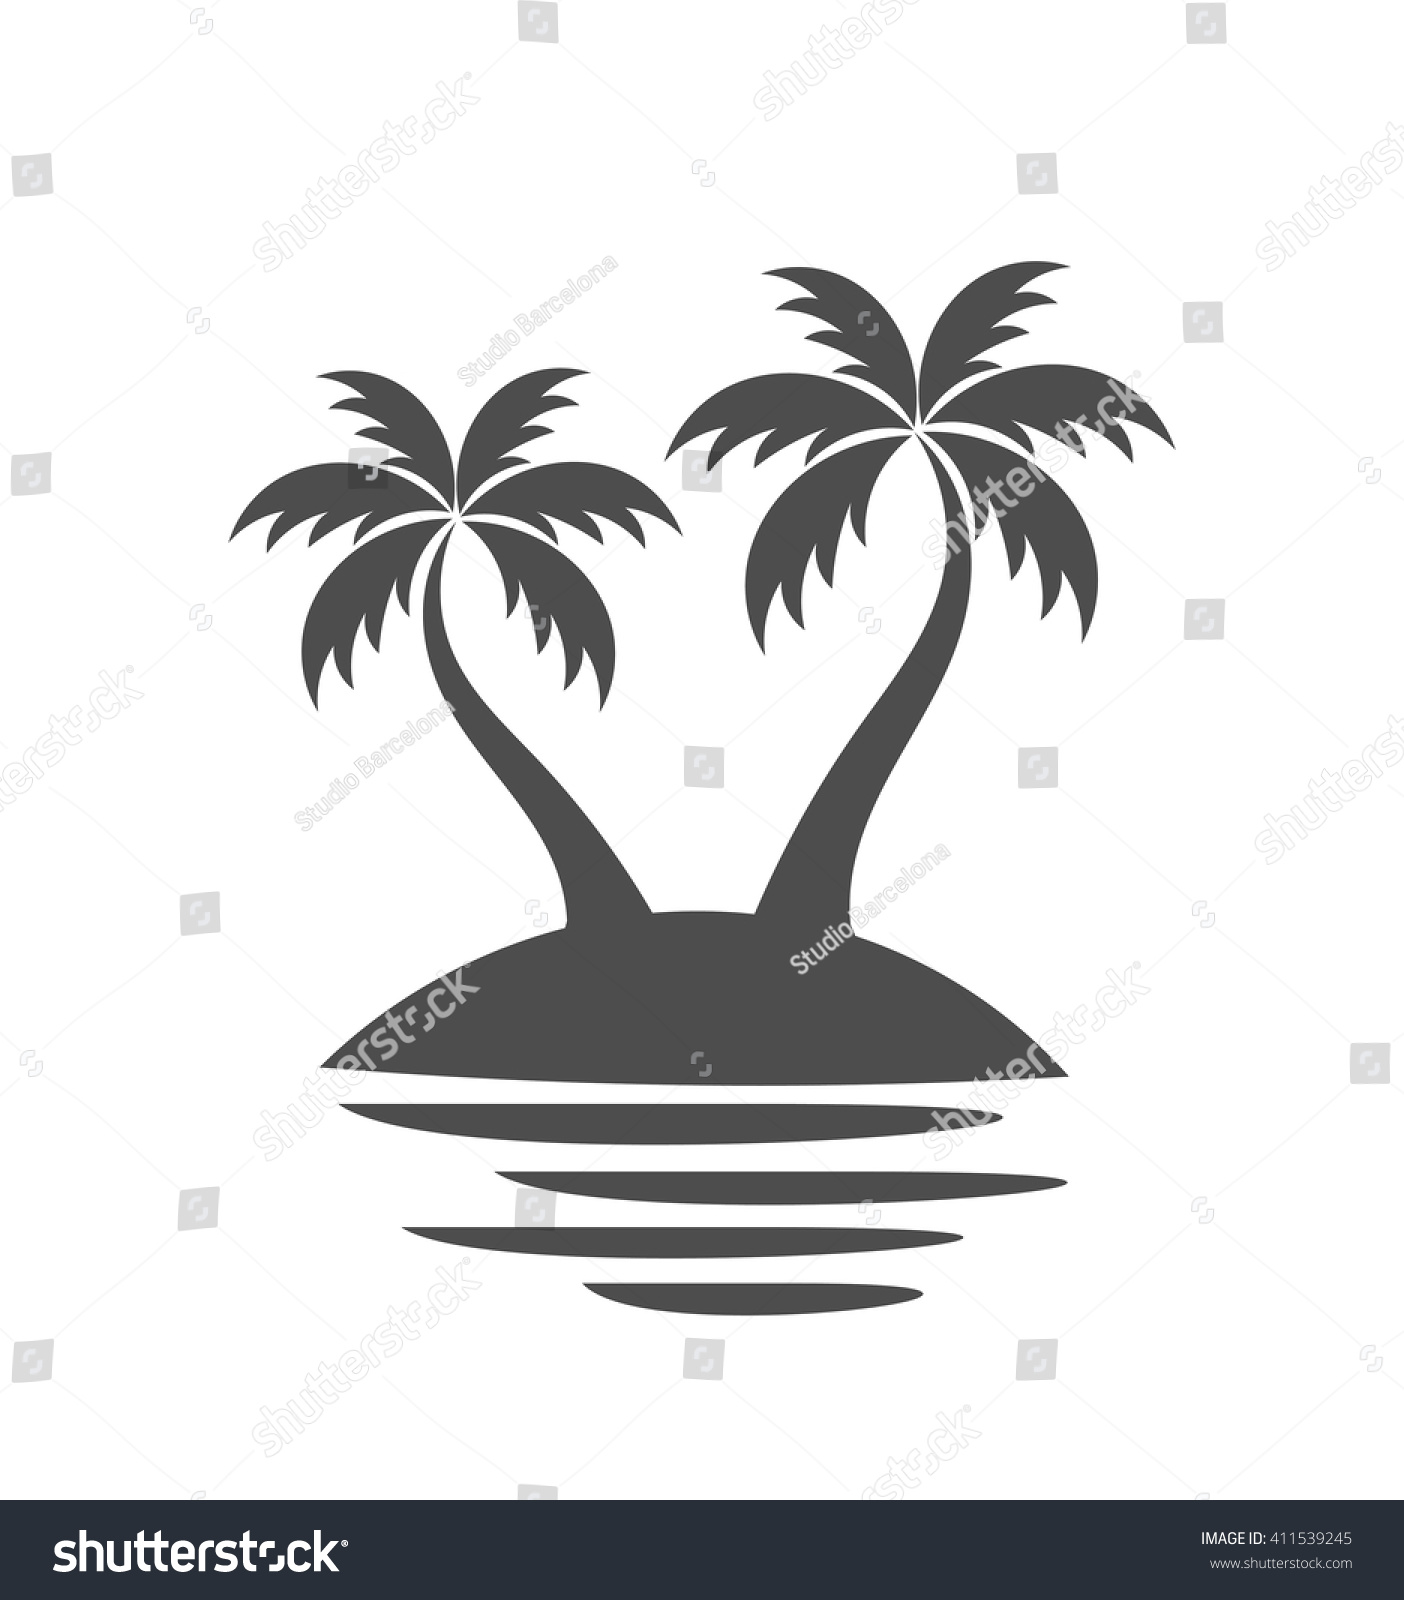 Palm Trees On Island Vector Illustration Stock Vector Royalty Free 411539245 Shutterstock 8353